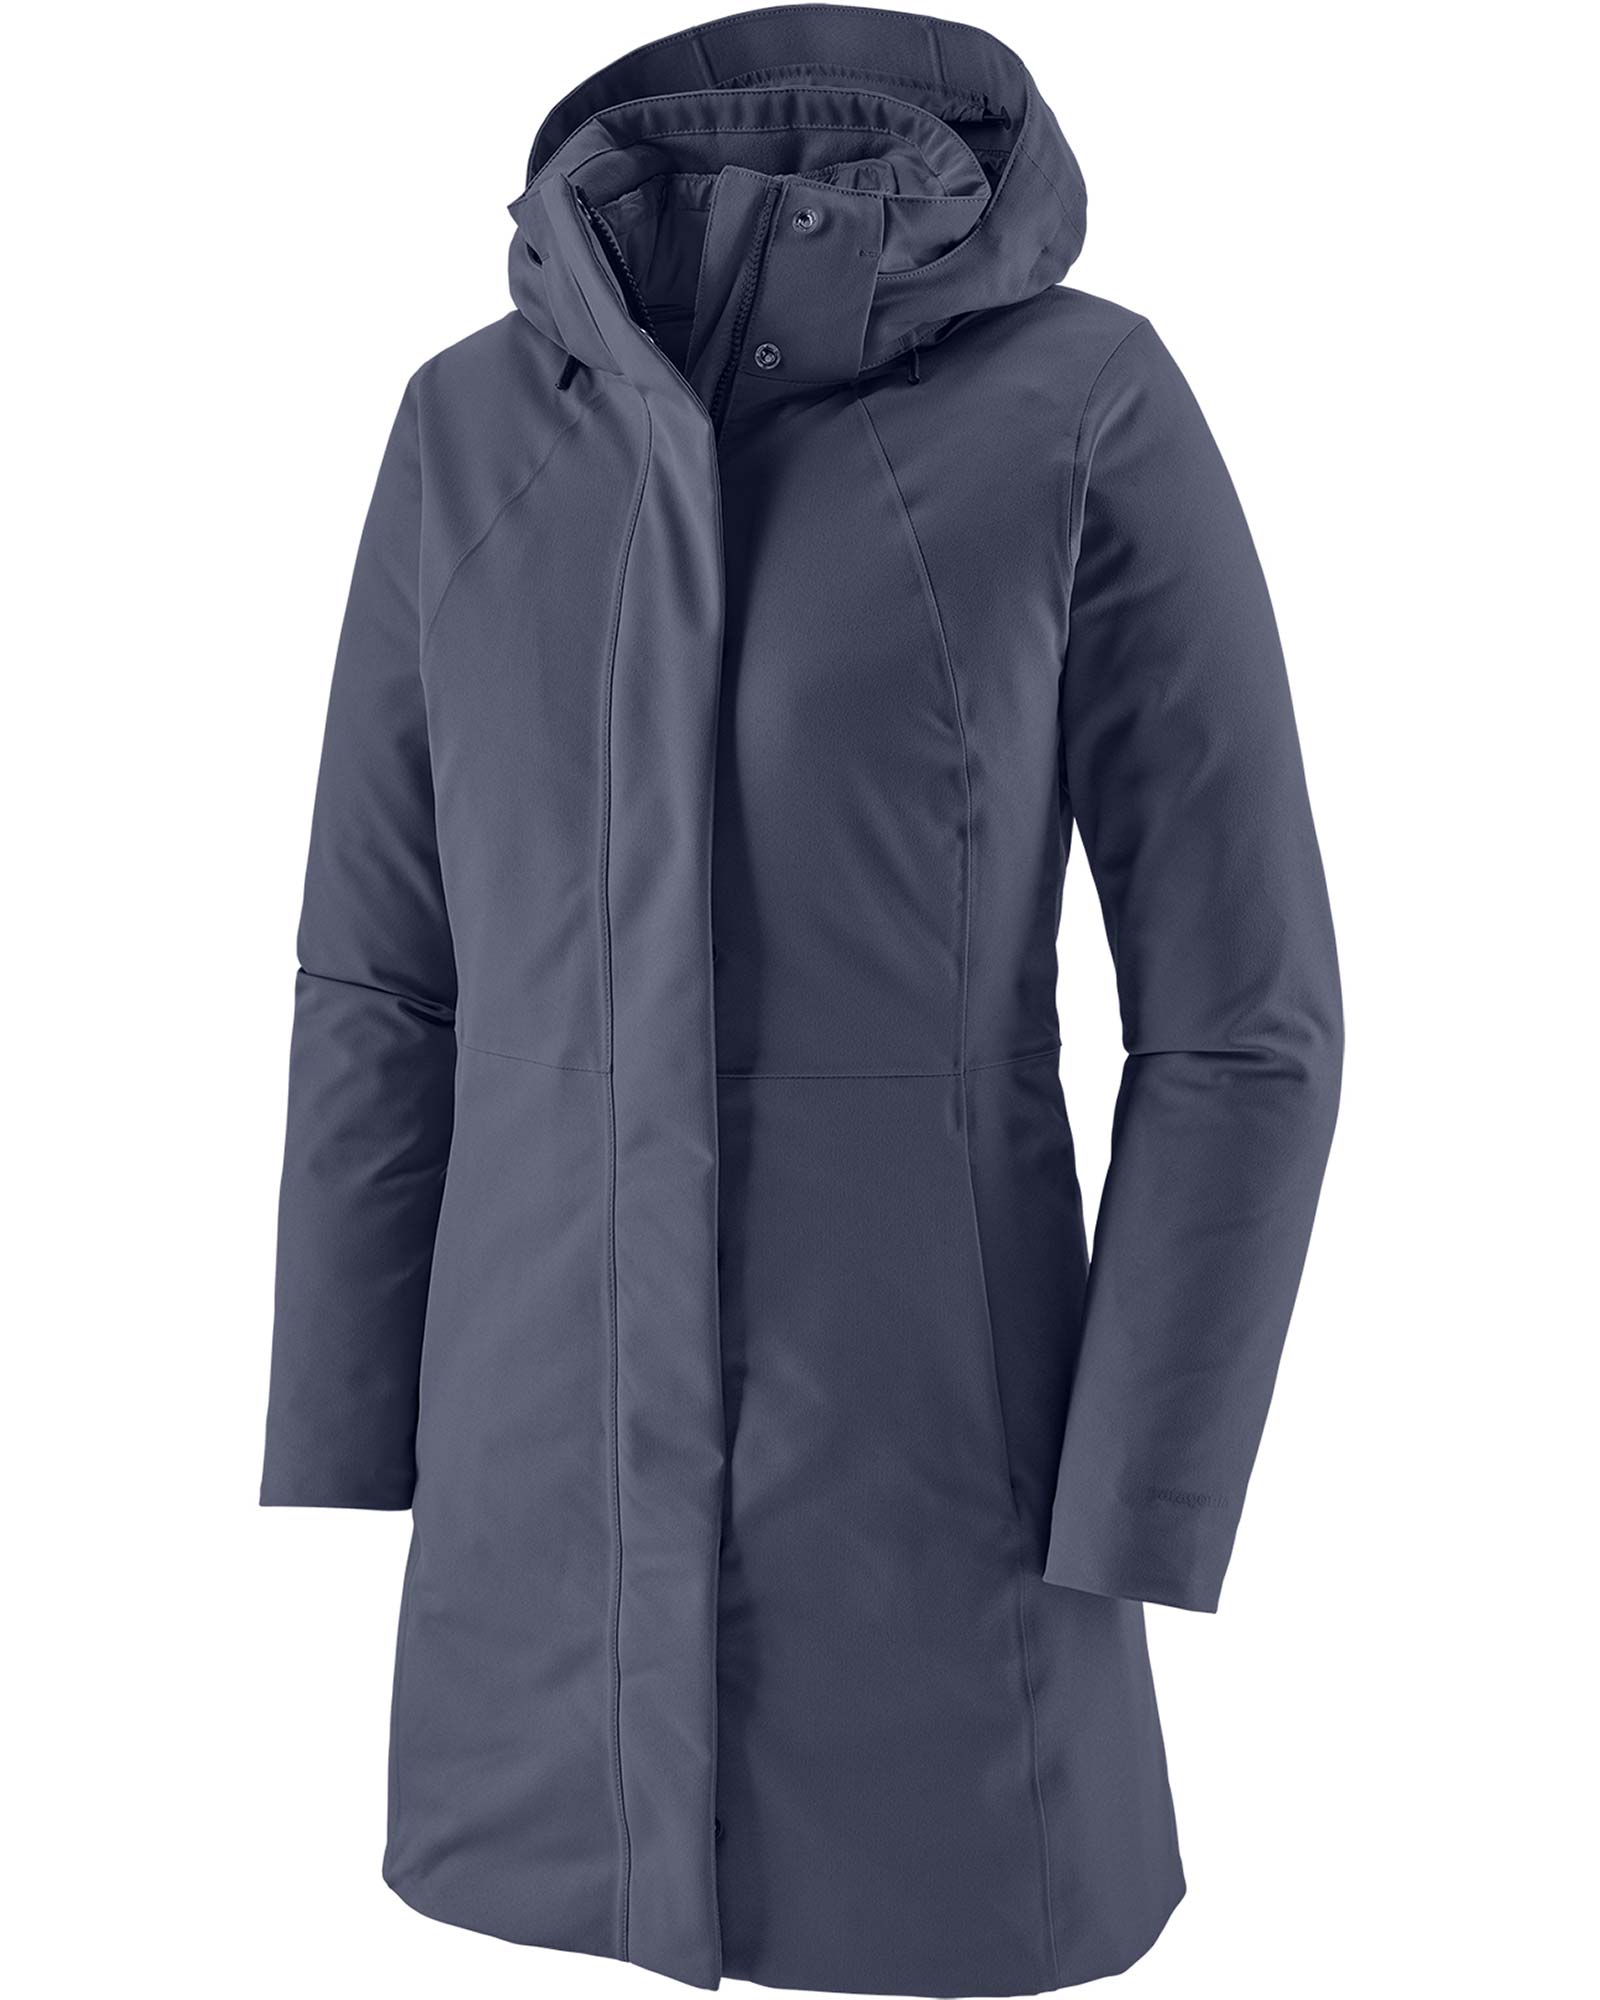 Patagonia Tres 3 in 1 Women’s Parka - Smolder Blue S